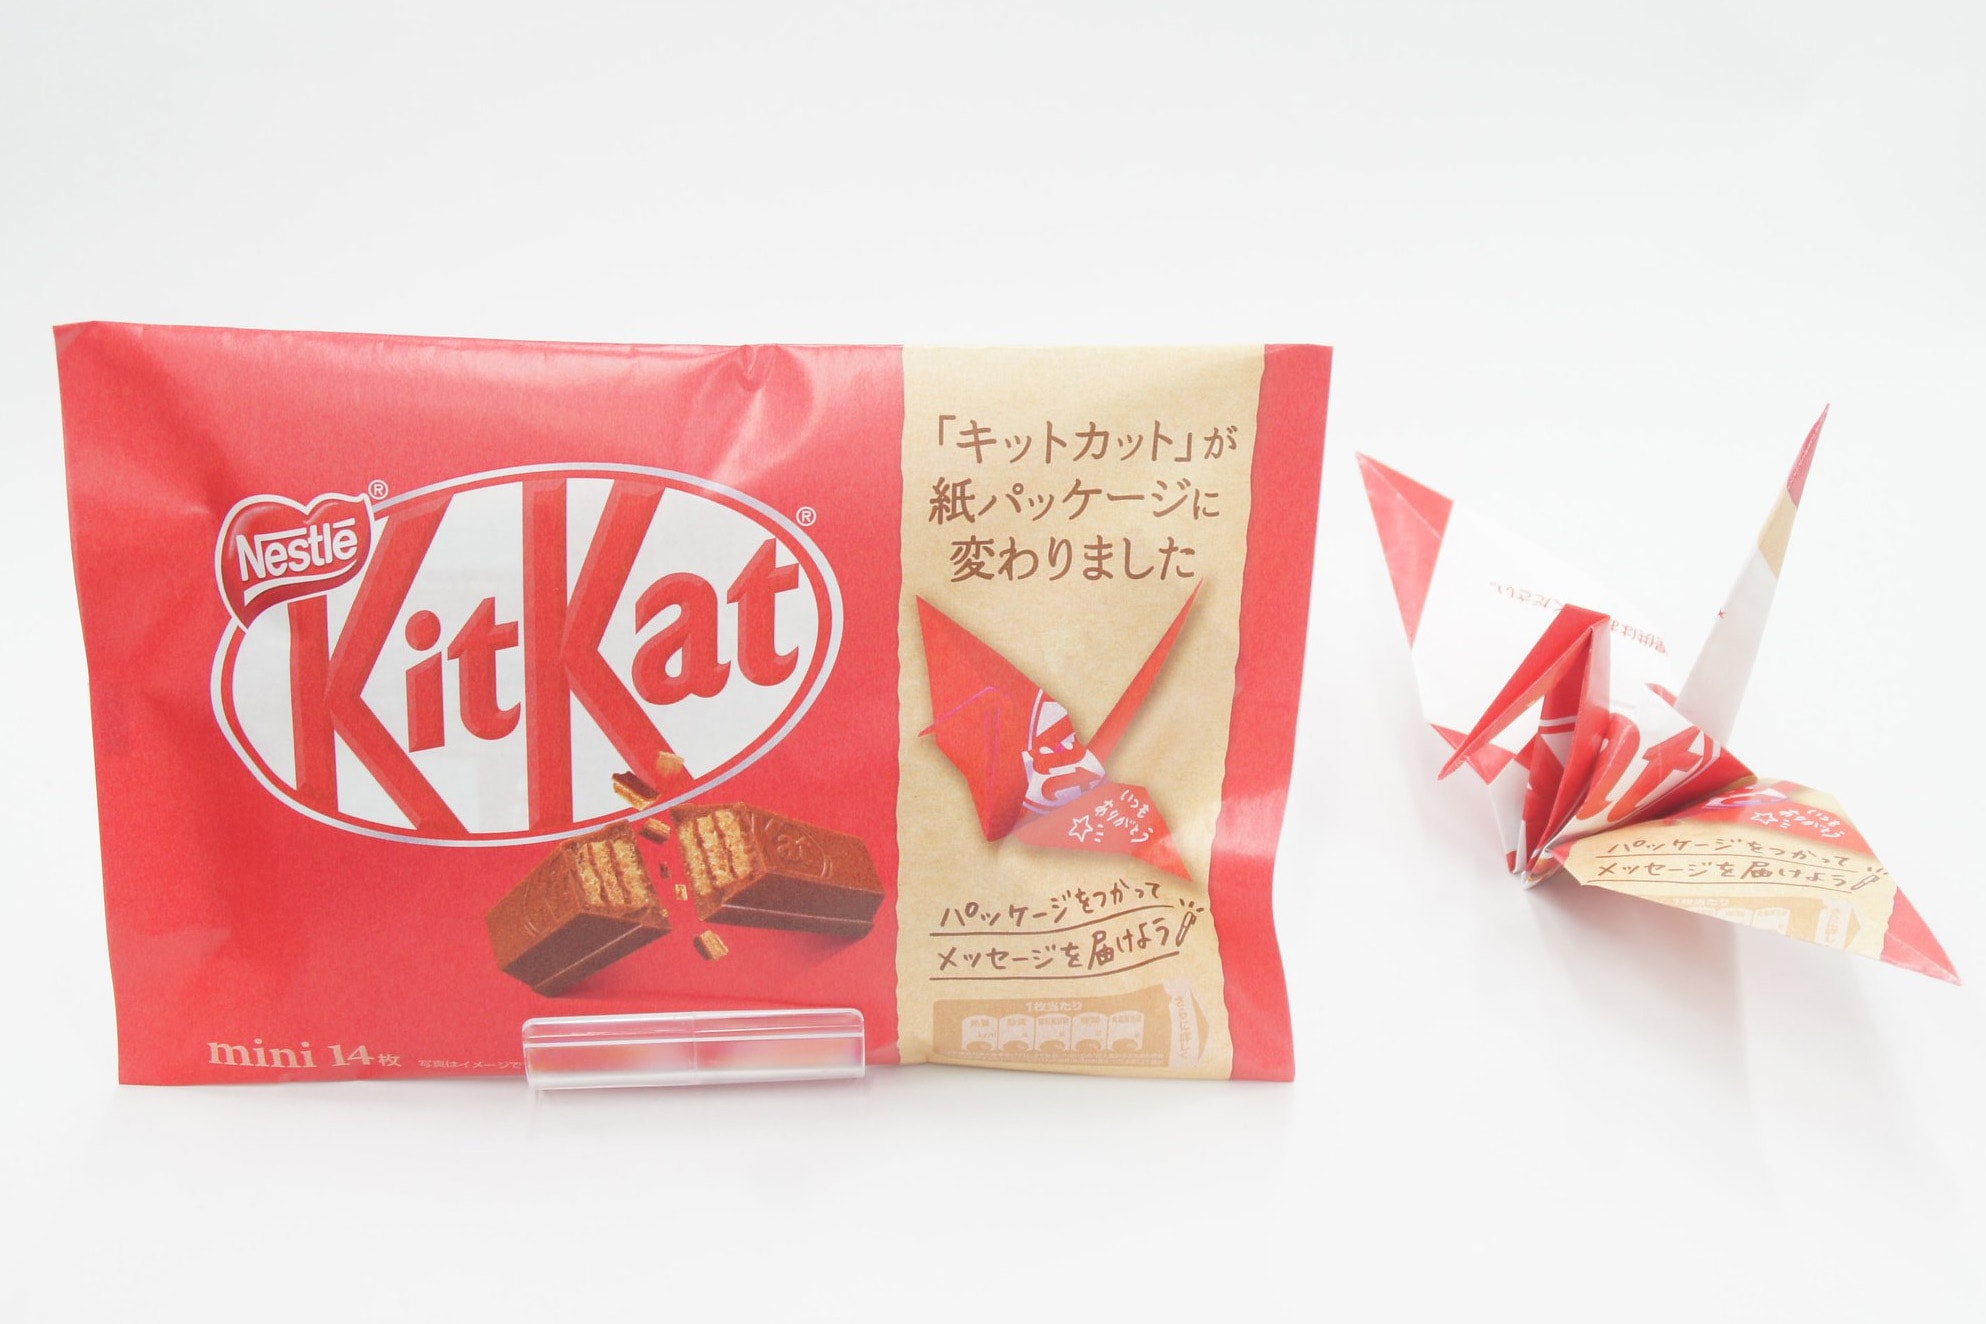 Kit Kat Replaces Plastic Wrap with Origami Paper Packaging Sustainability Plastic Waste Environment Initiative Japan